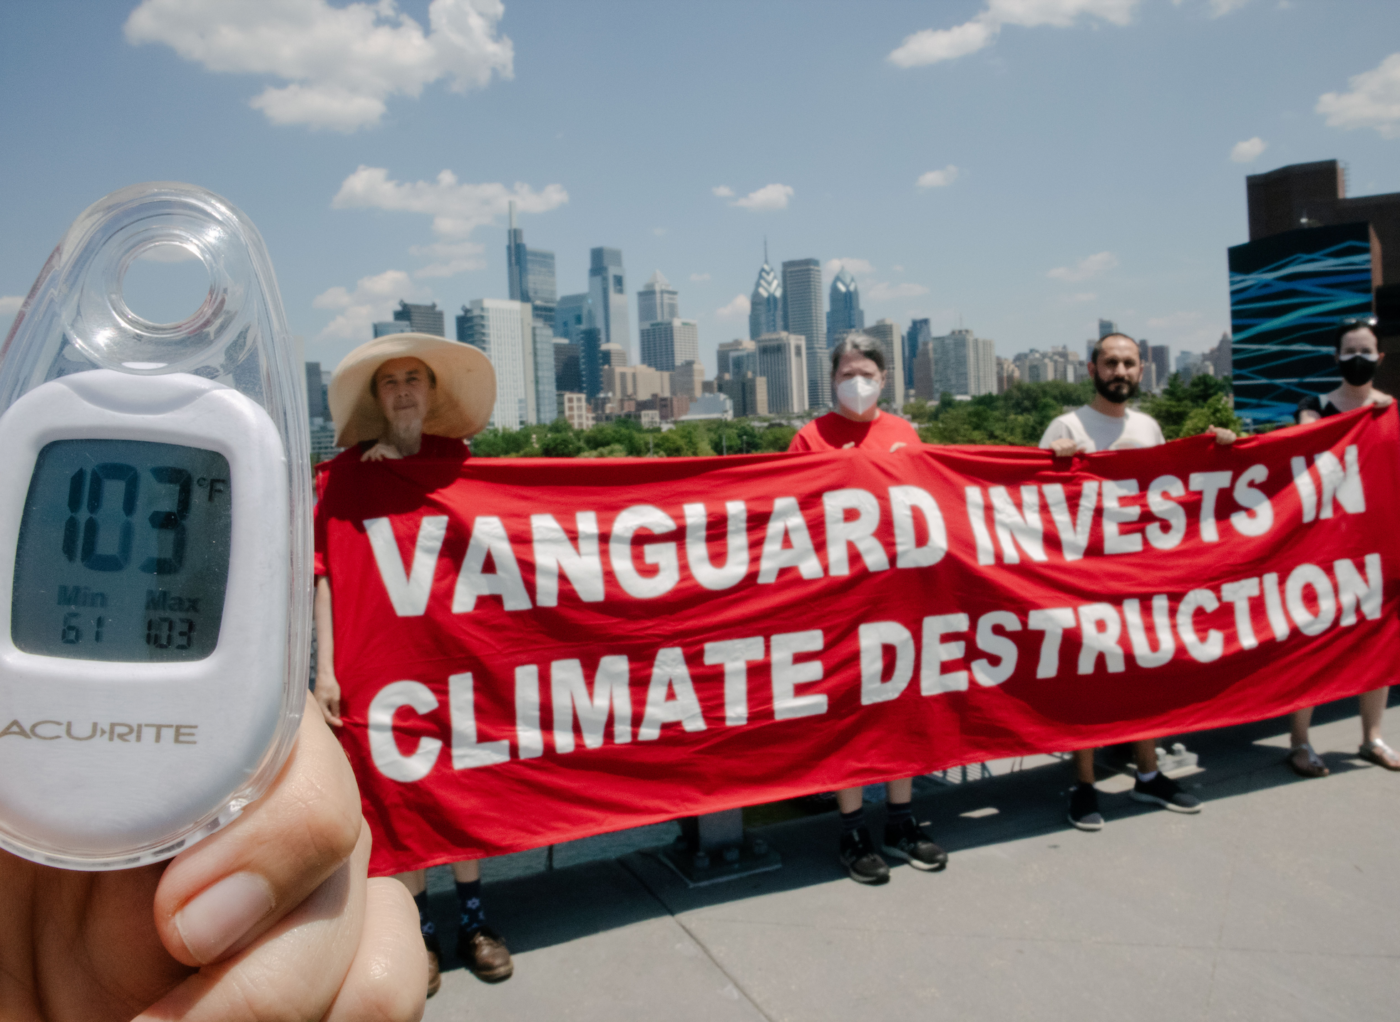 Activists hold a sign that reads "Vanguard invests in climate destruction" during a heat wave in Philadelphia. Someone is showing a thermometer that reads 103 degrees F.